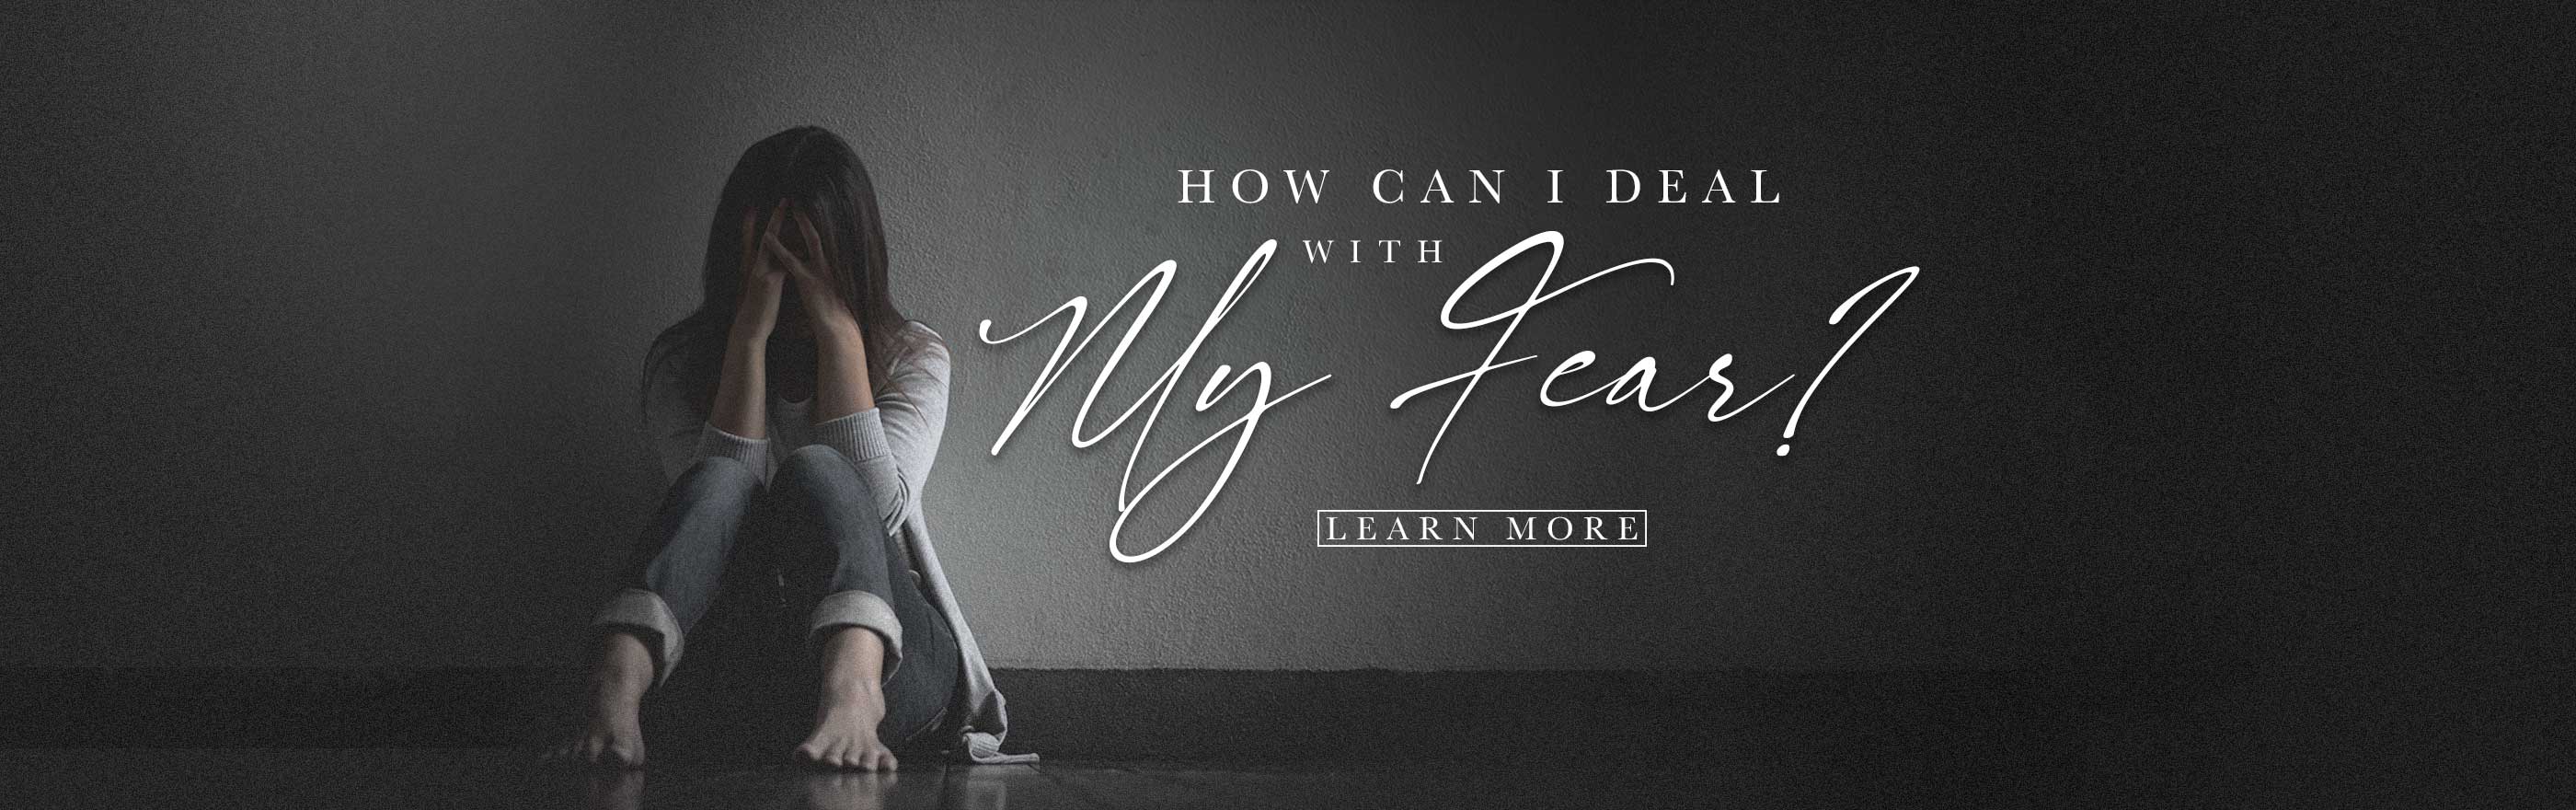 Article: How Can I Deal with my Fear?